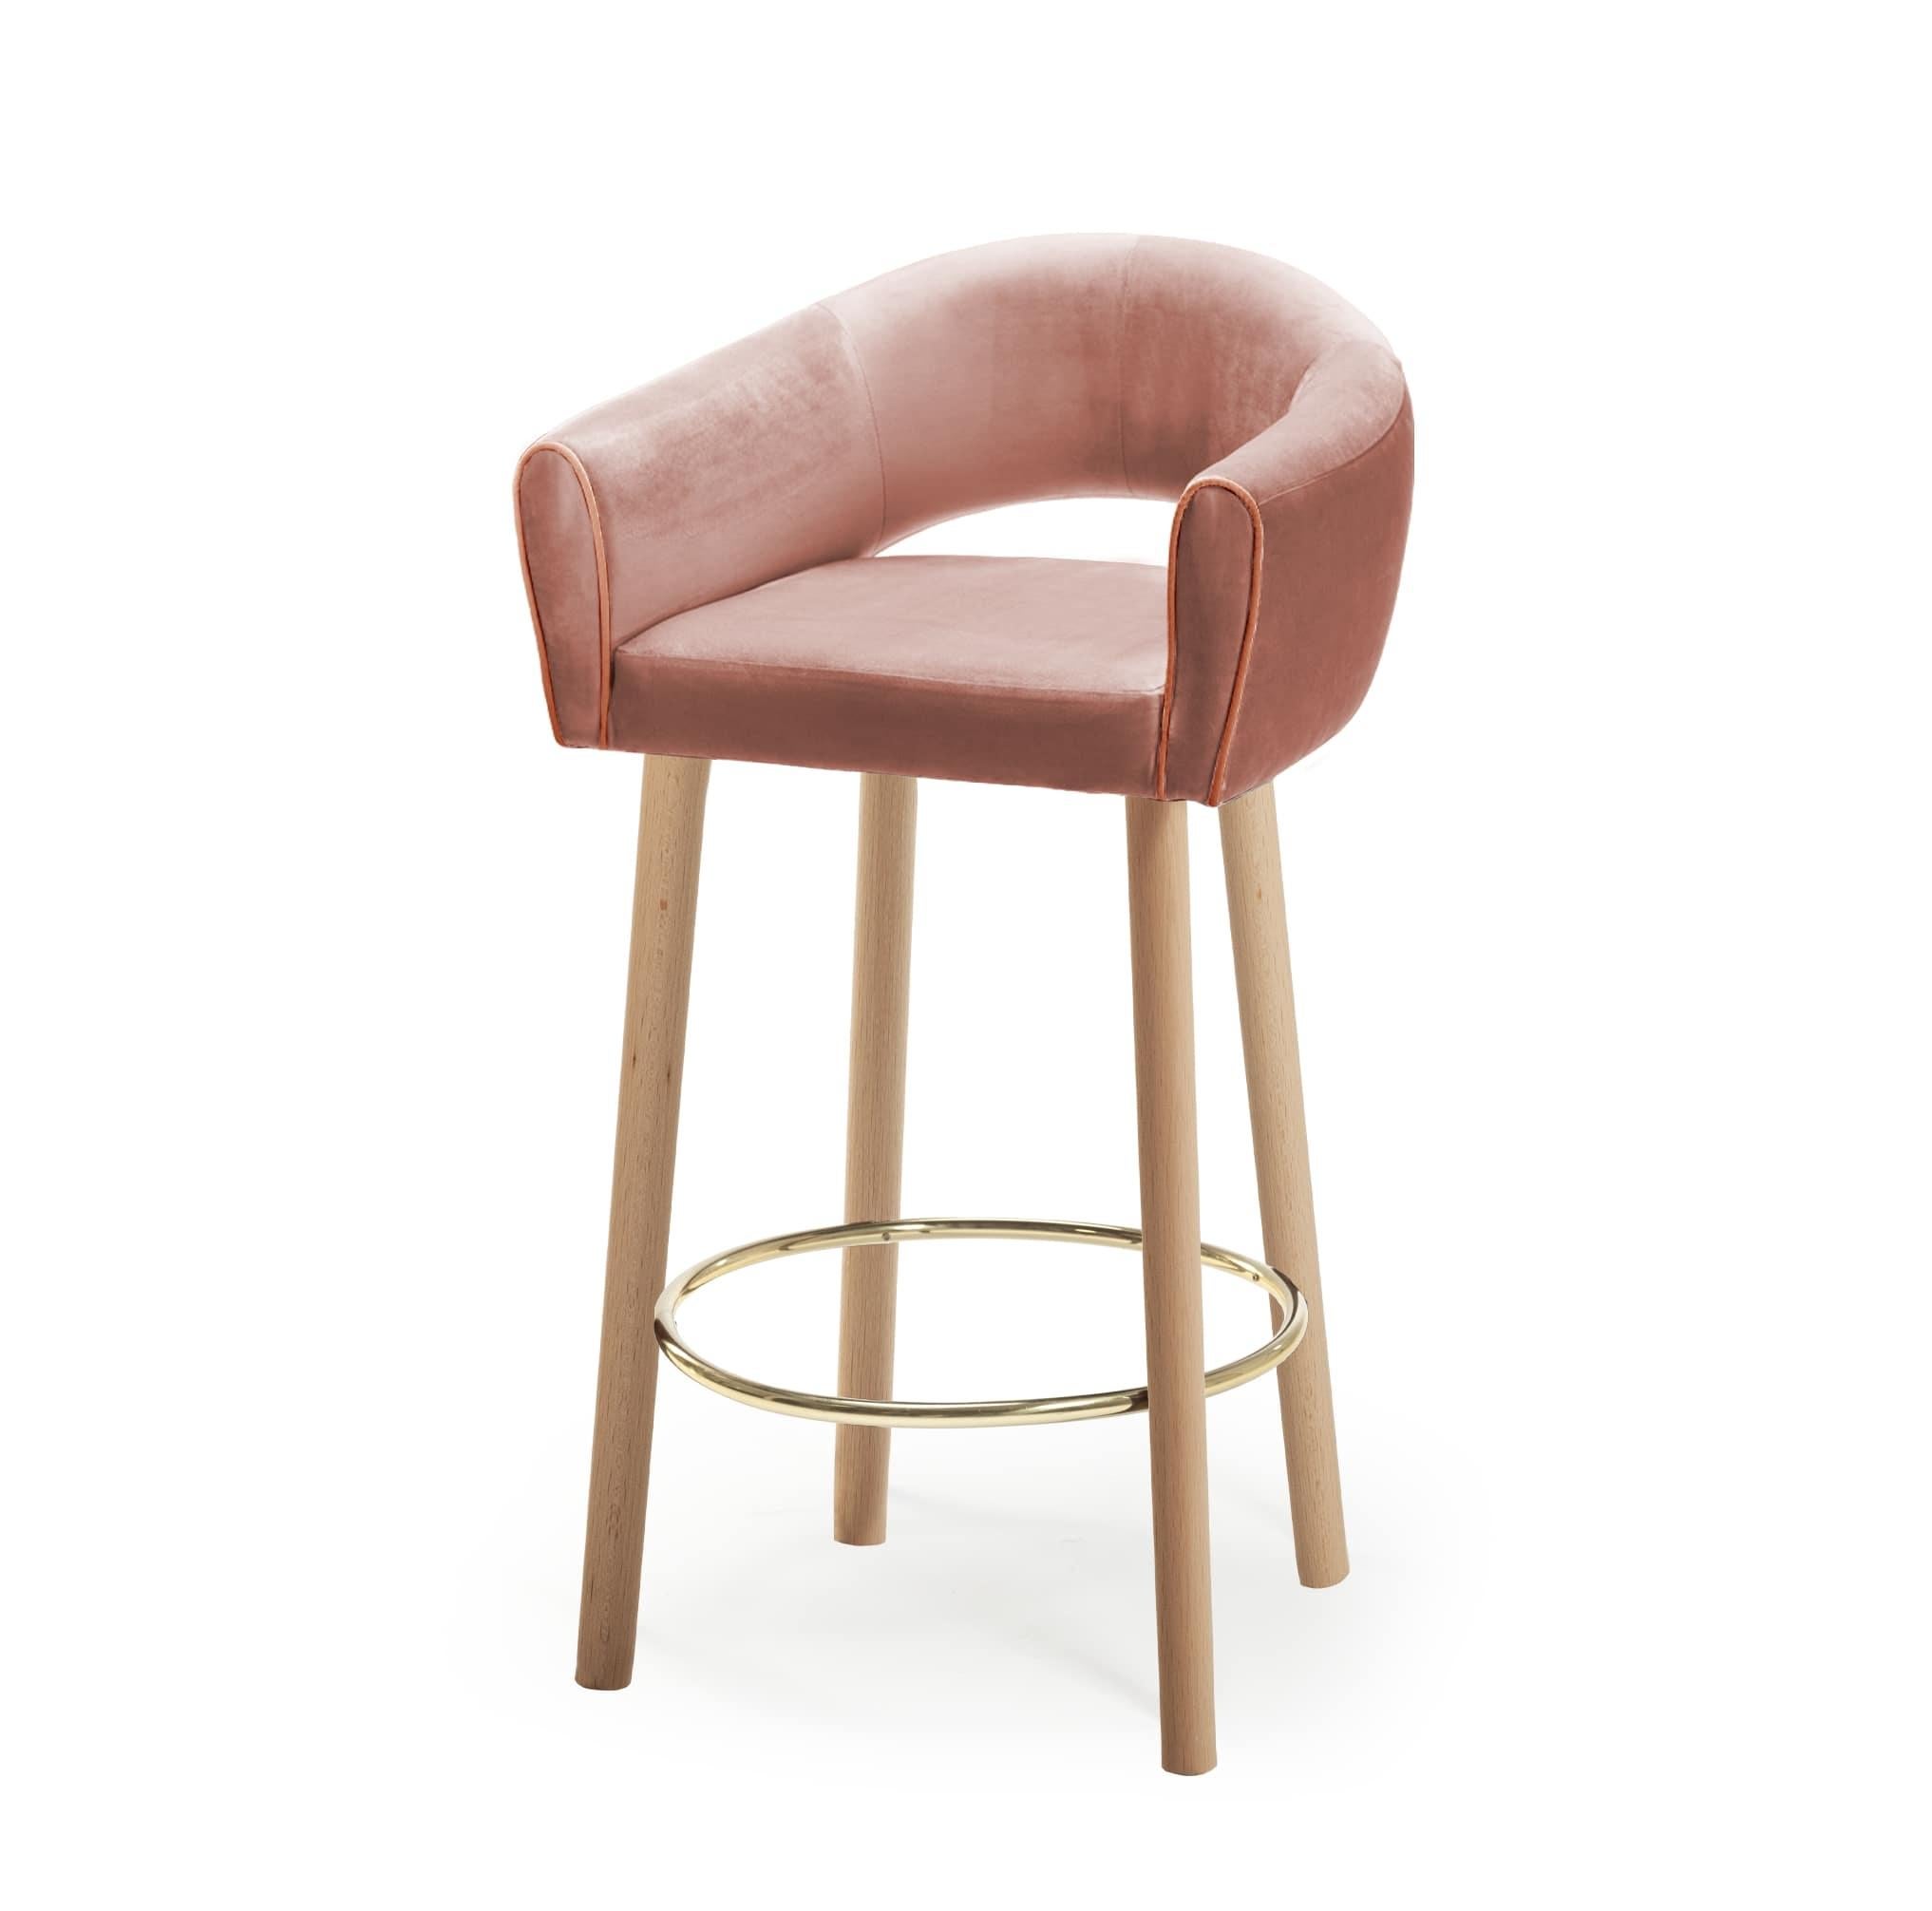 Stylish and elegant, grace bar stool is extremely comfortable in its perfect finishing’s. With its smooth edges, grace has definitely a familiar retro feeling. A perfect combination of highly comfortable and perfectly tailored upholstery with the